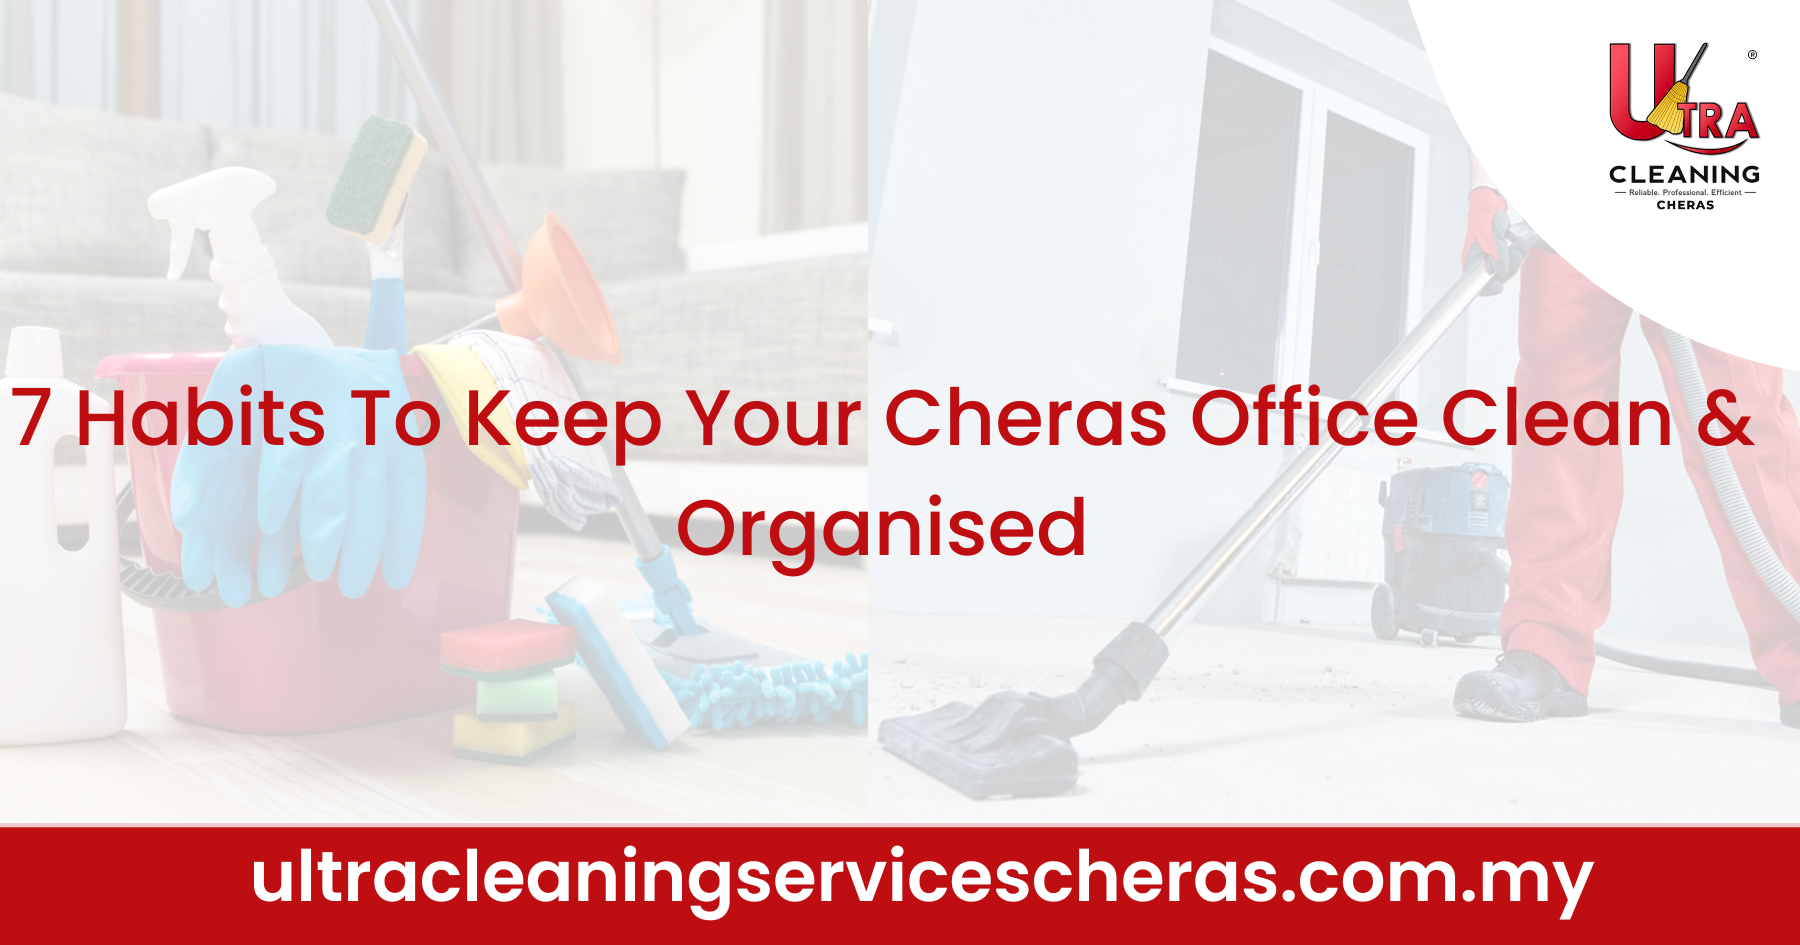 7 Habits To Keep Your Cheras Office Clean & Organised